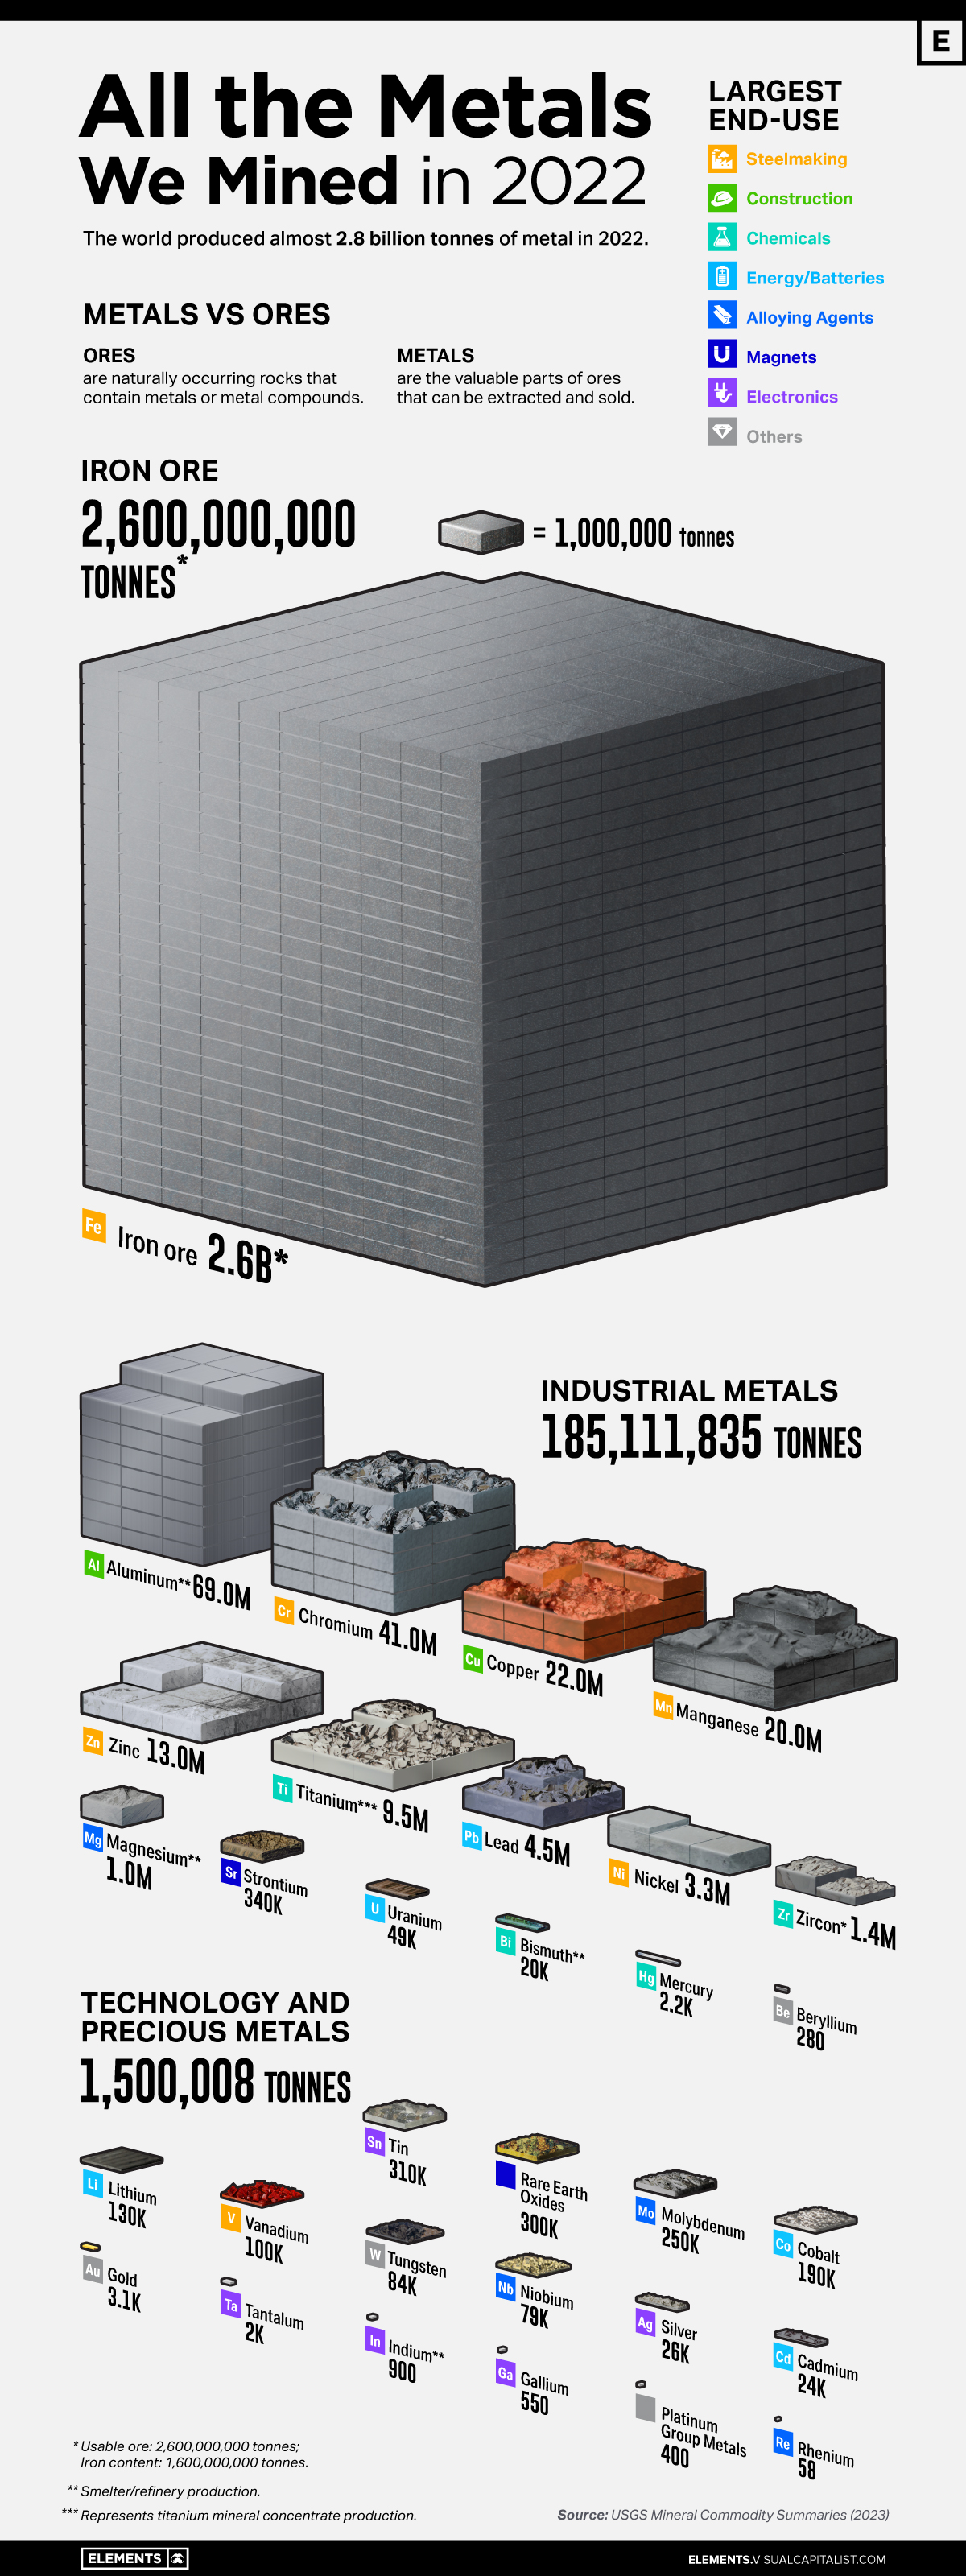 VCE_All_the_Metals_We_Mined_2022-Nov-14-1.jpg